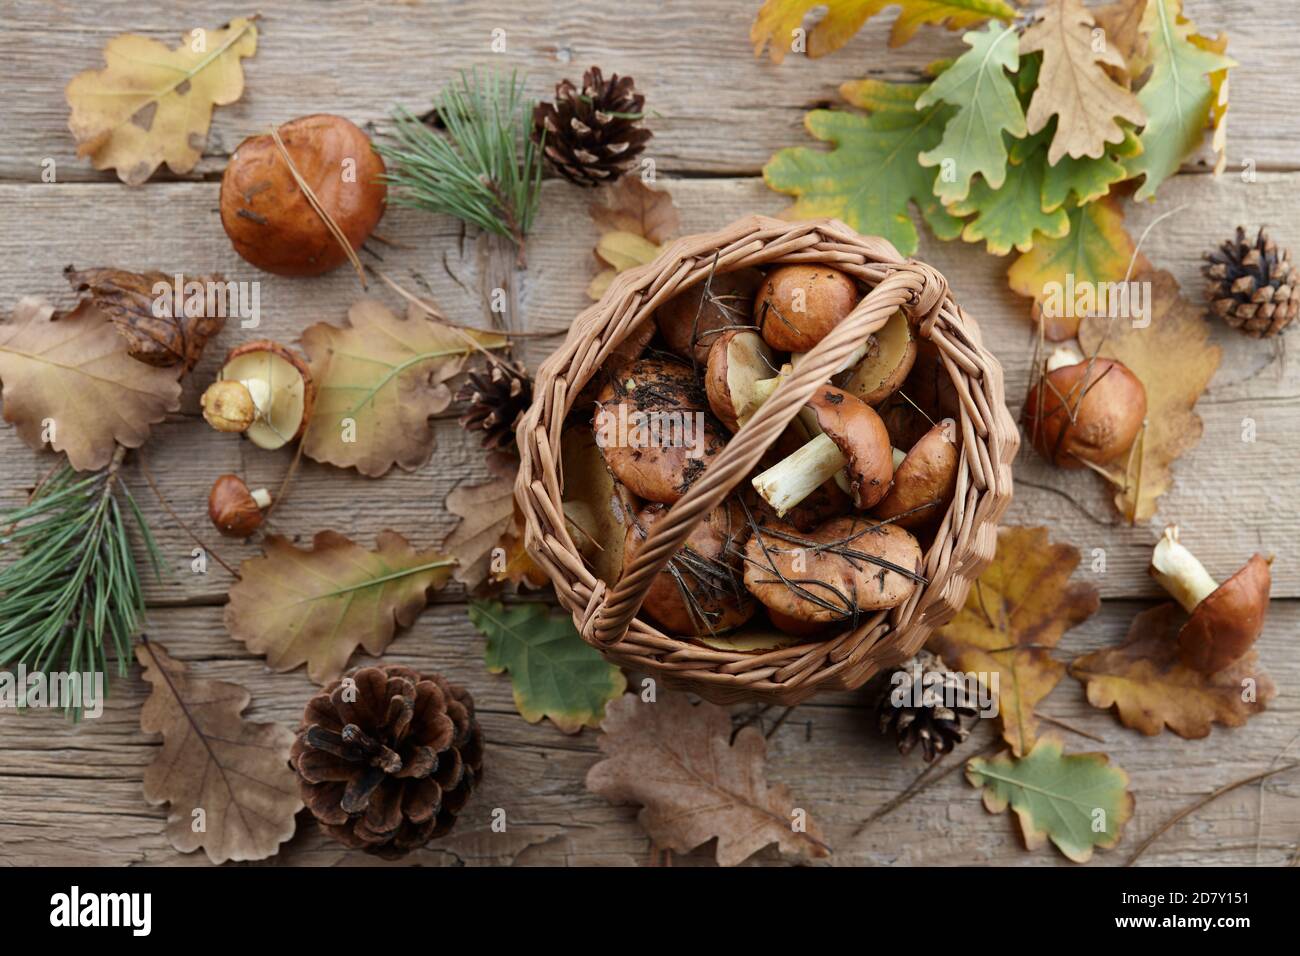 Mushrooms basket and autumn leaves on wooden background, copy space Stock Photo